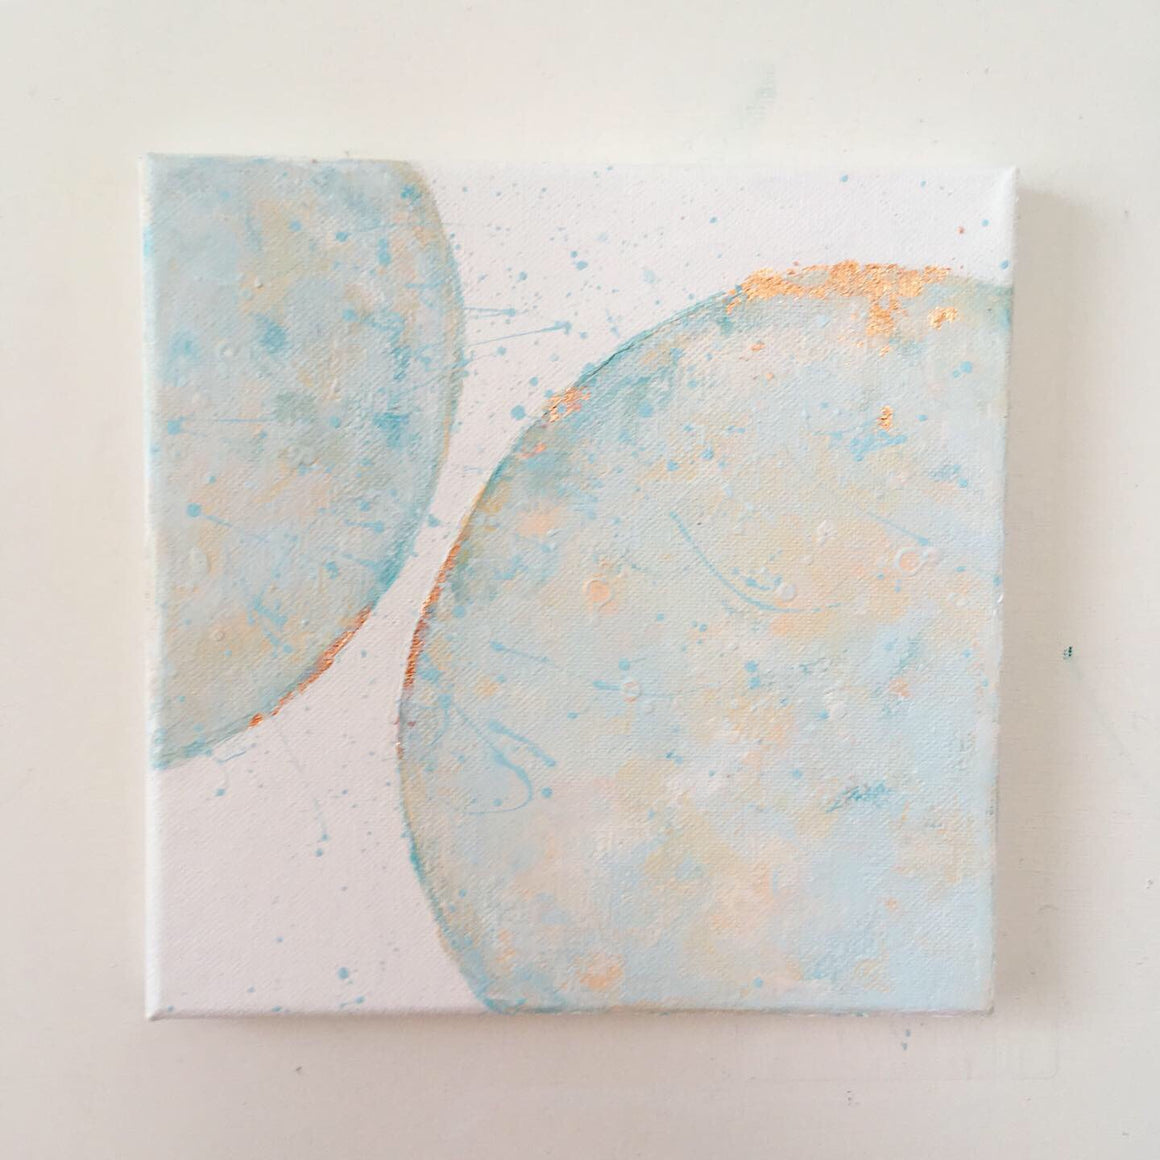 Moonscape #118 | Mer Lunaires Series | Abstract painting moon sky blue peach